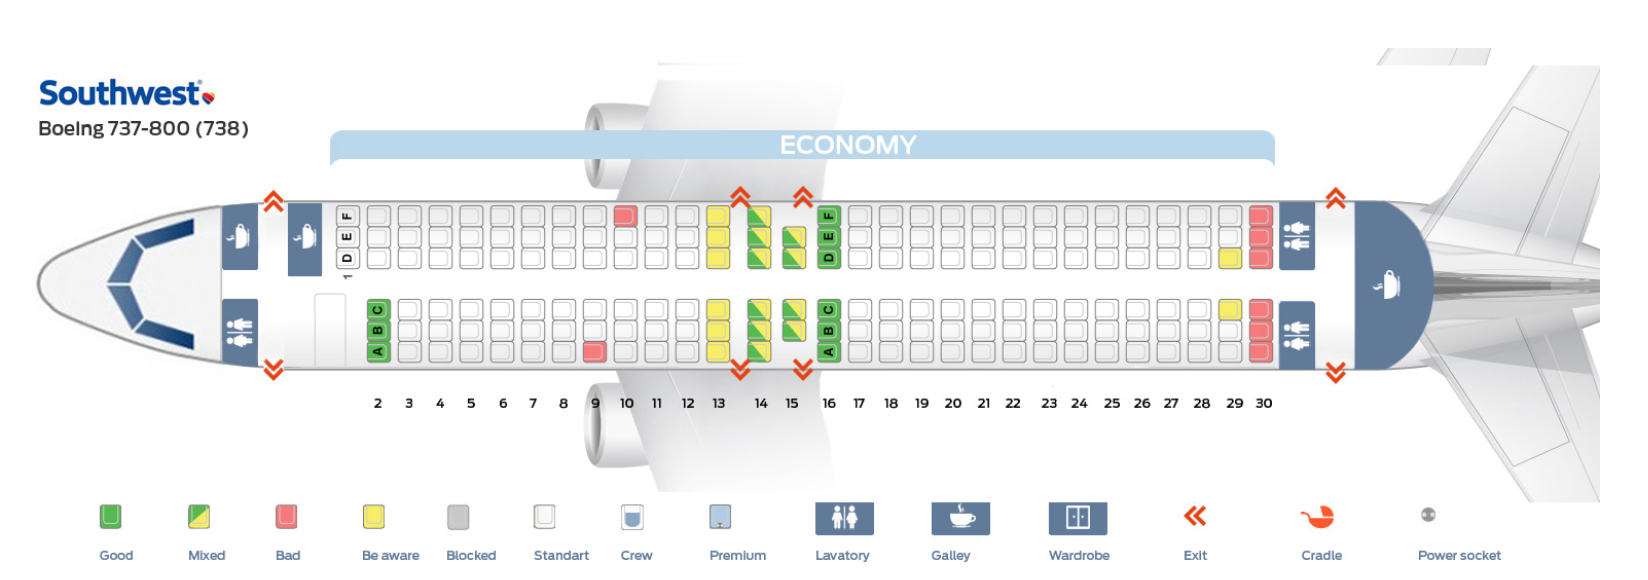 Southwest Airlines Plane Seating Chart The Best Seats When Flying On Southwest Airlines [2021]